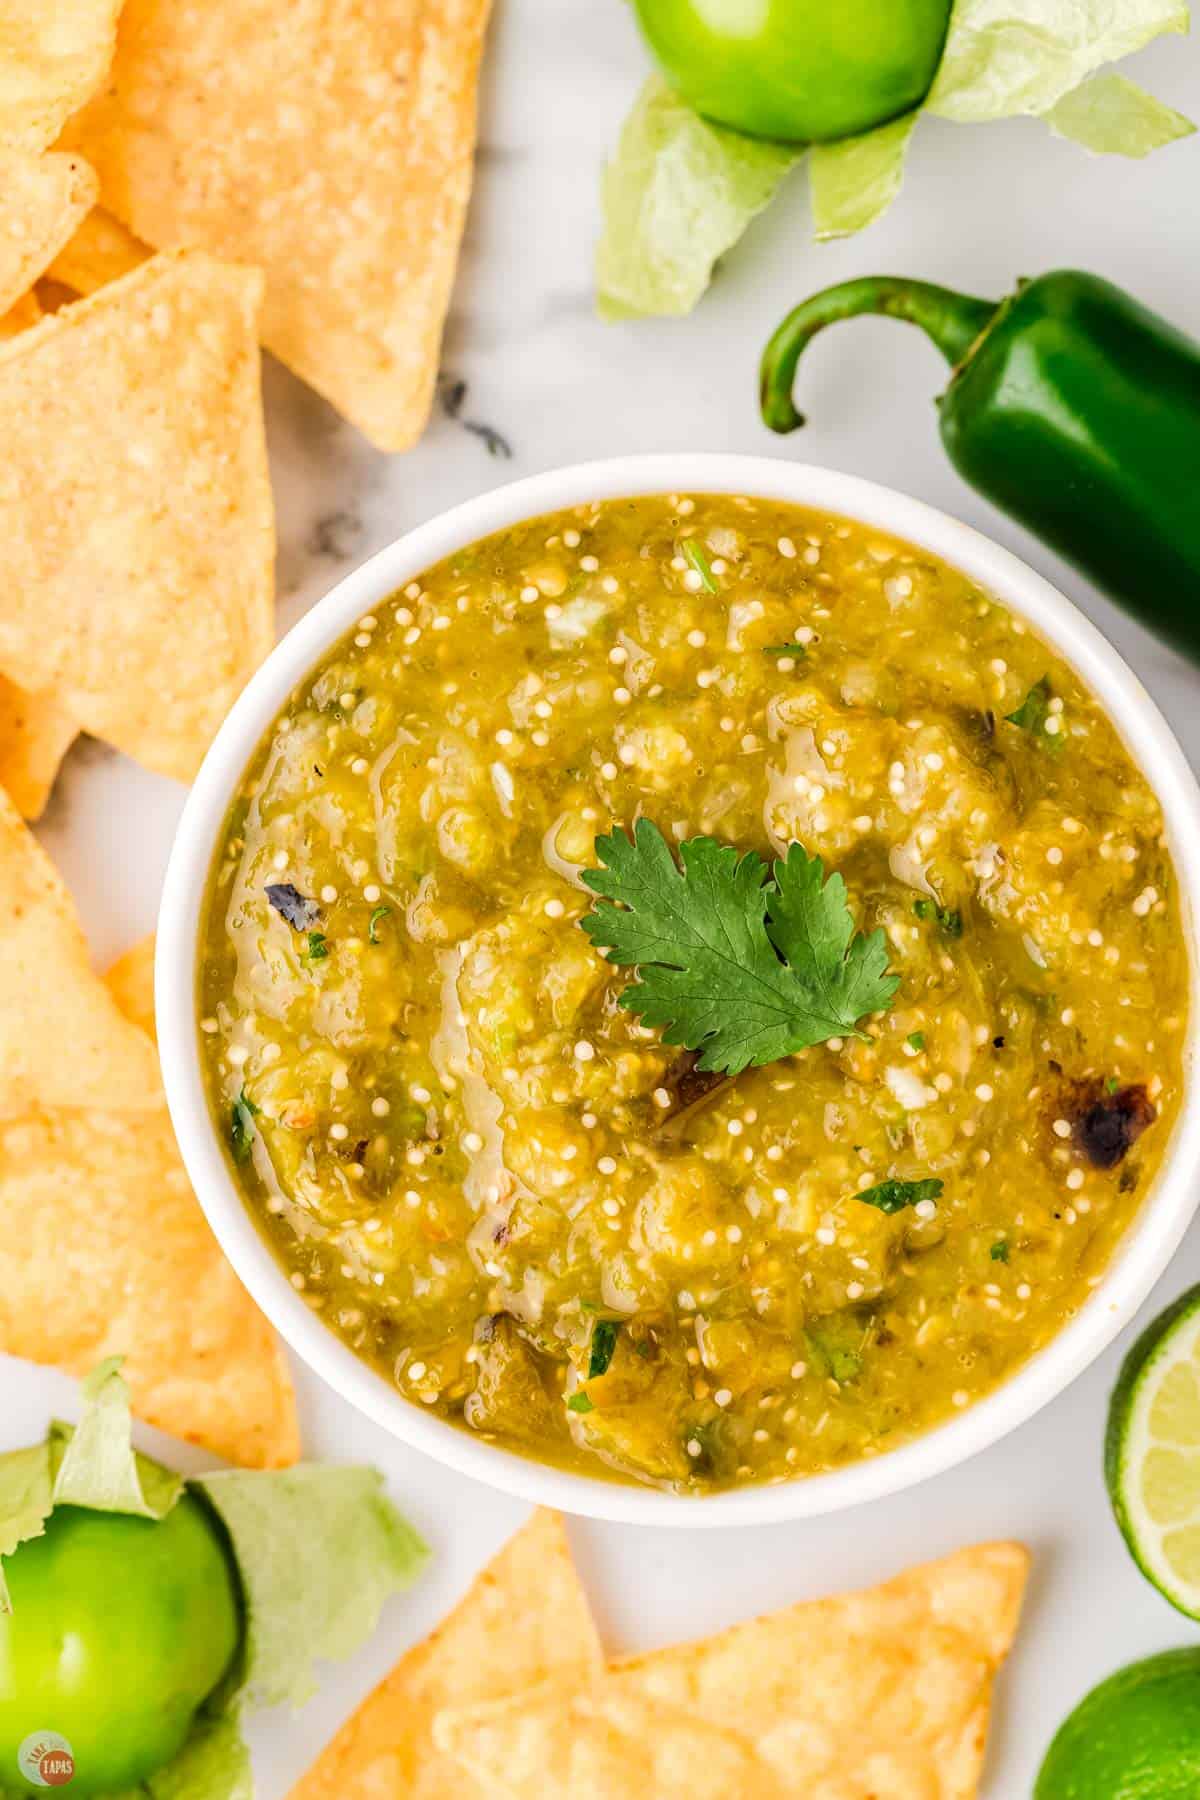 Mexican cuisine is not complete without this green salsa recipe